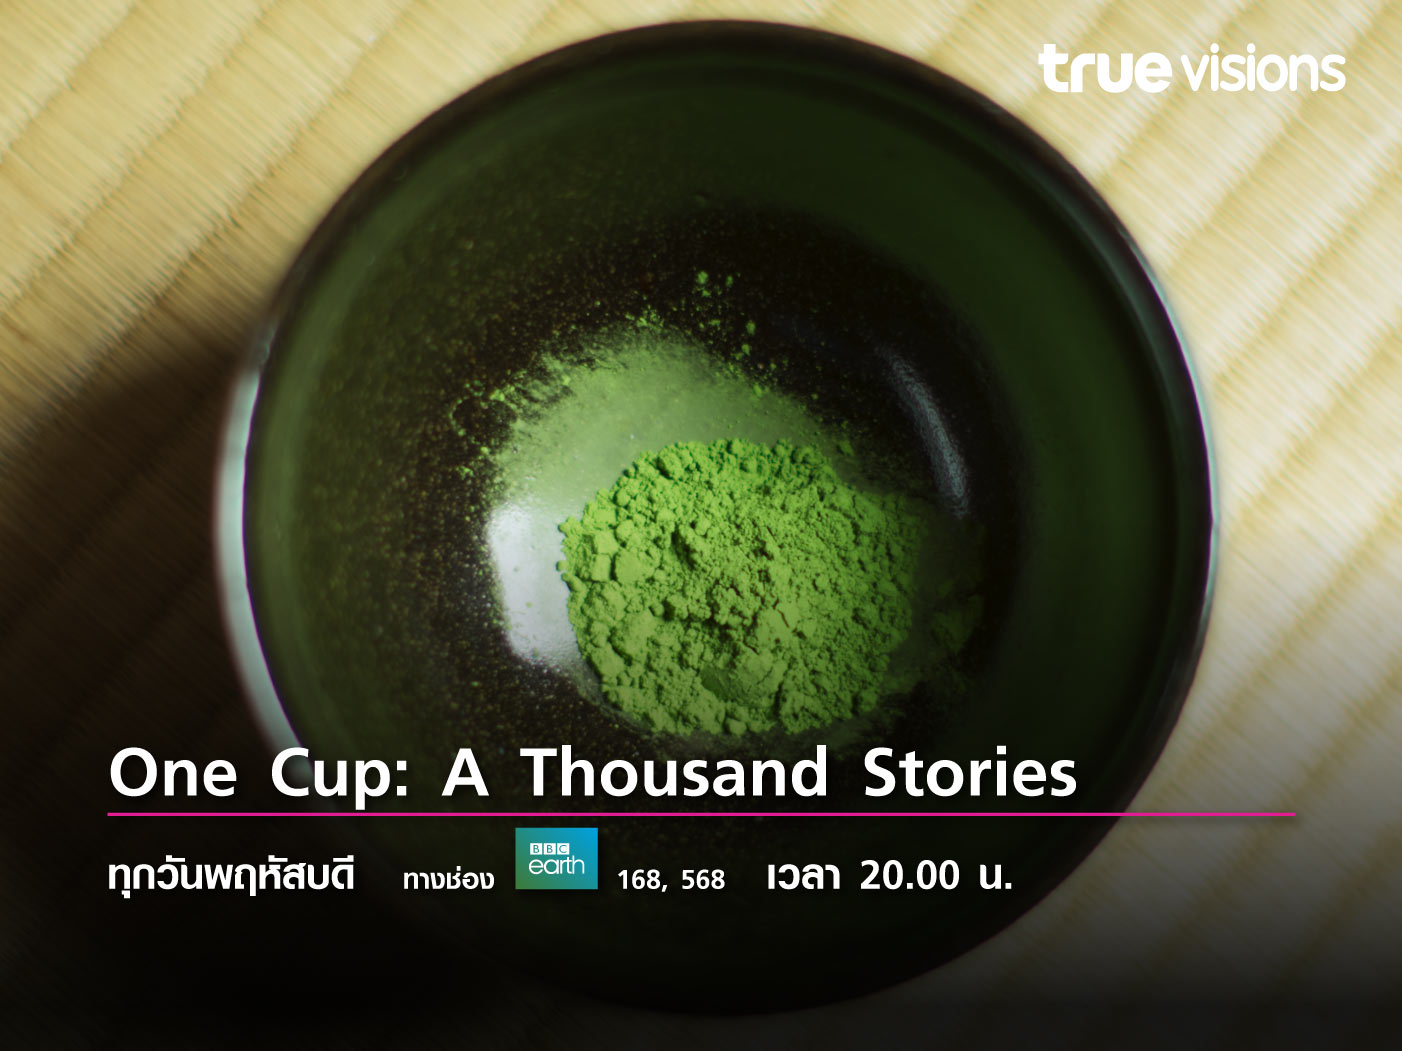 One Cup: A Thousand Stories